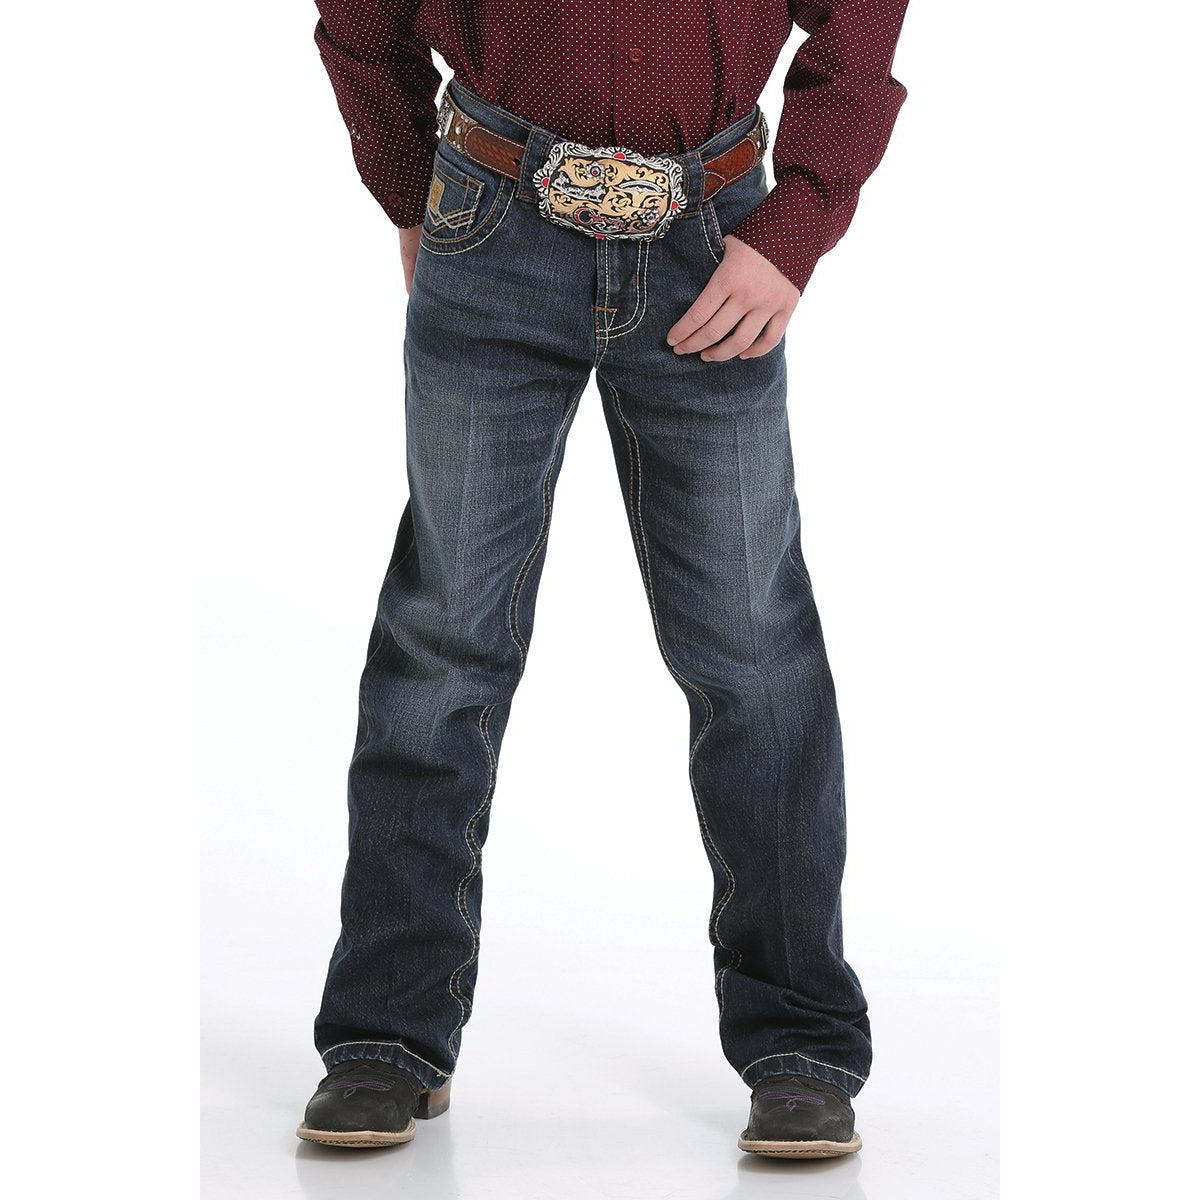 Cinch Boys Relaxed Fit Jeans - Classic Rinse